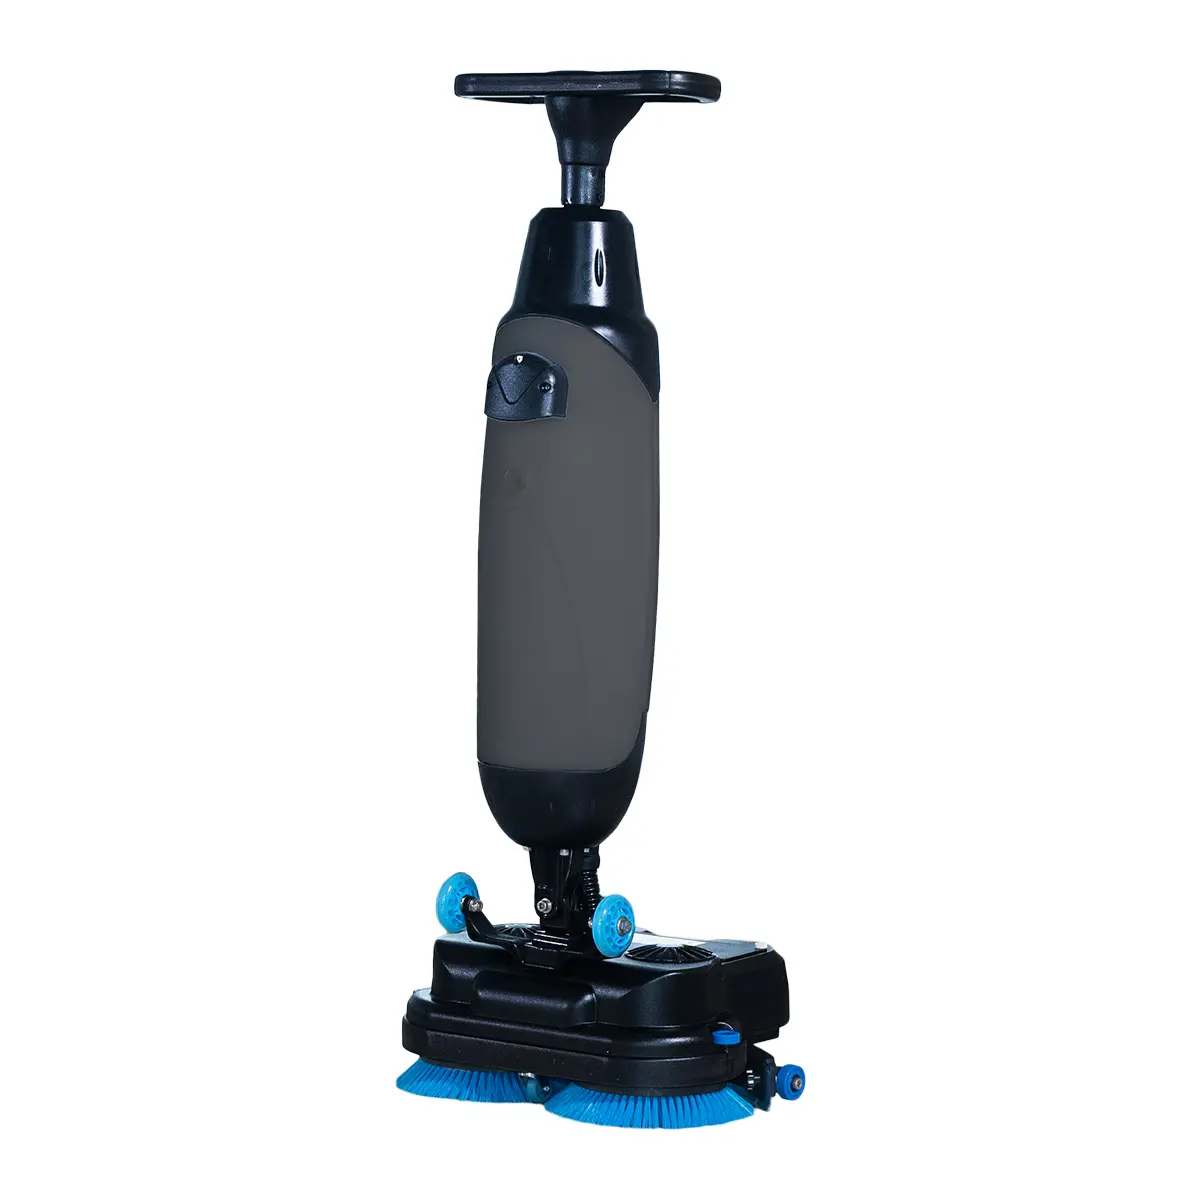 KUER Factory's KR-XS430 High-Performance Battery-Powered Floor Scrubber Redefining Cleaning Excellence